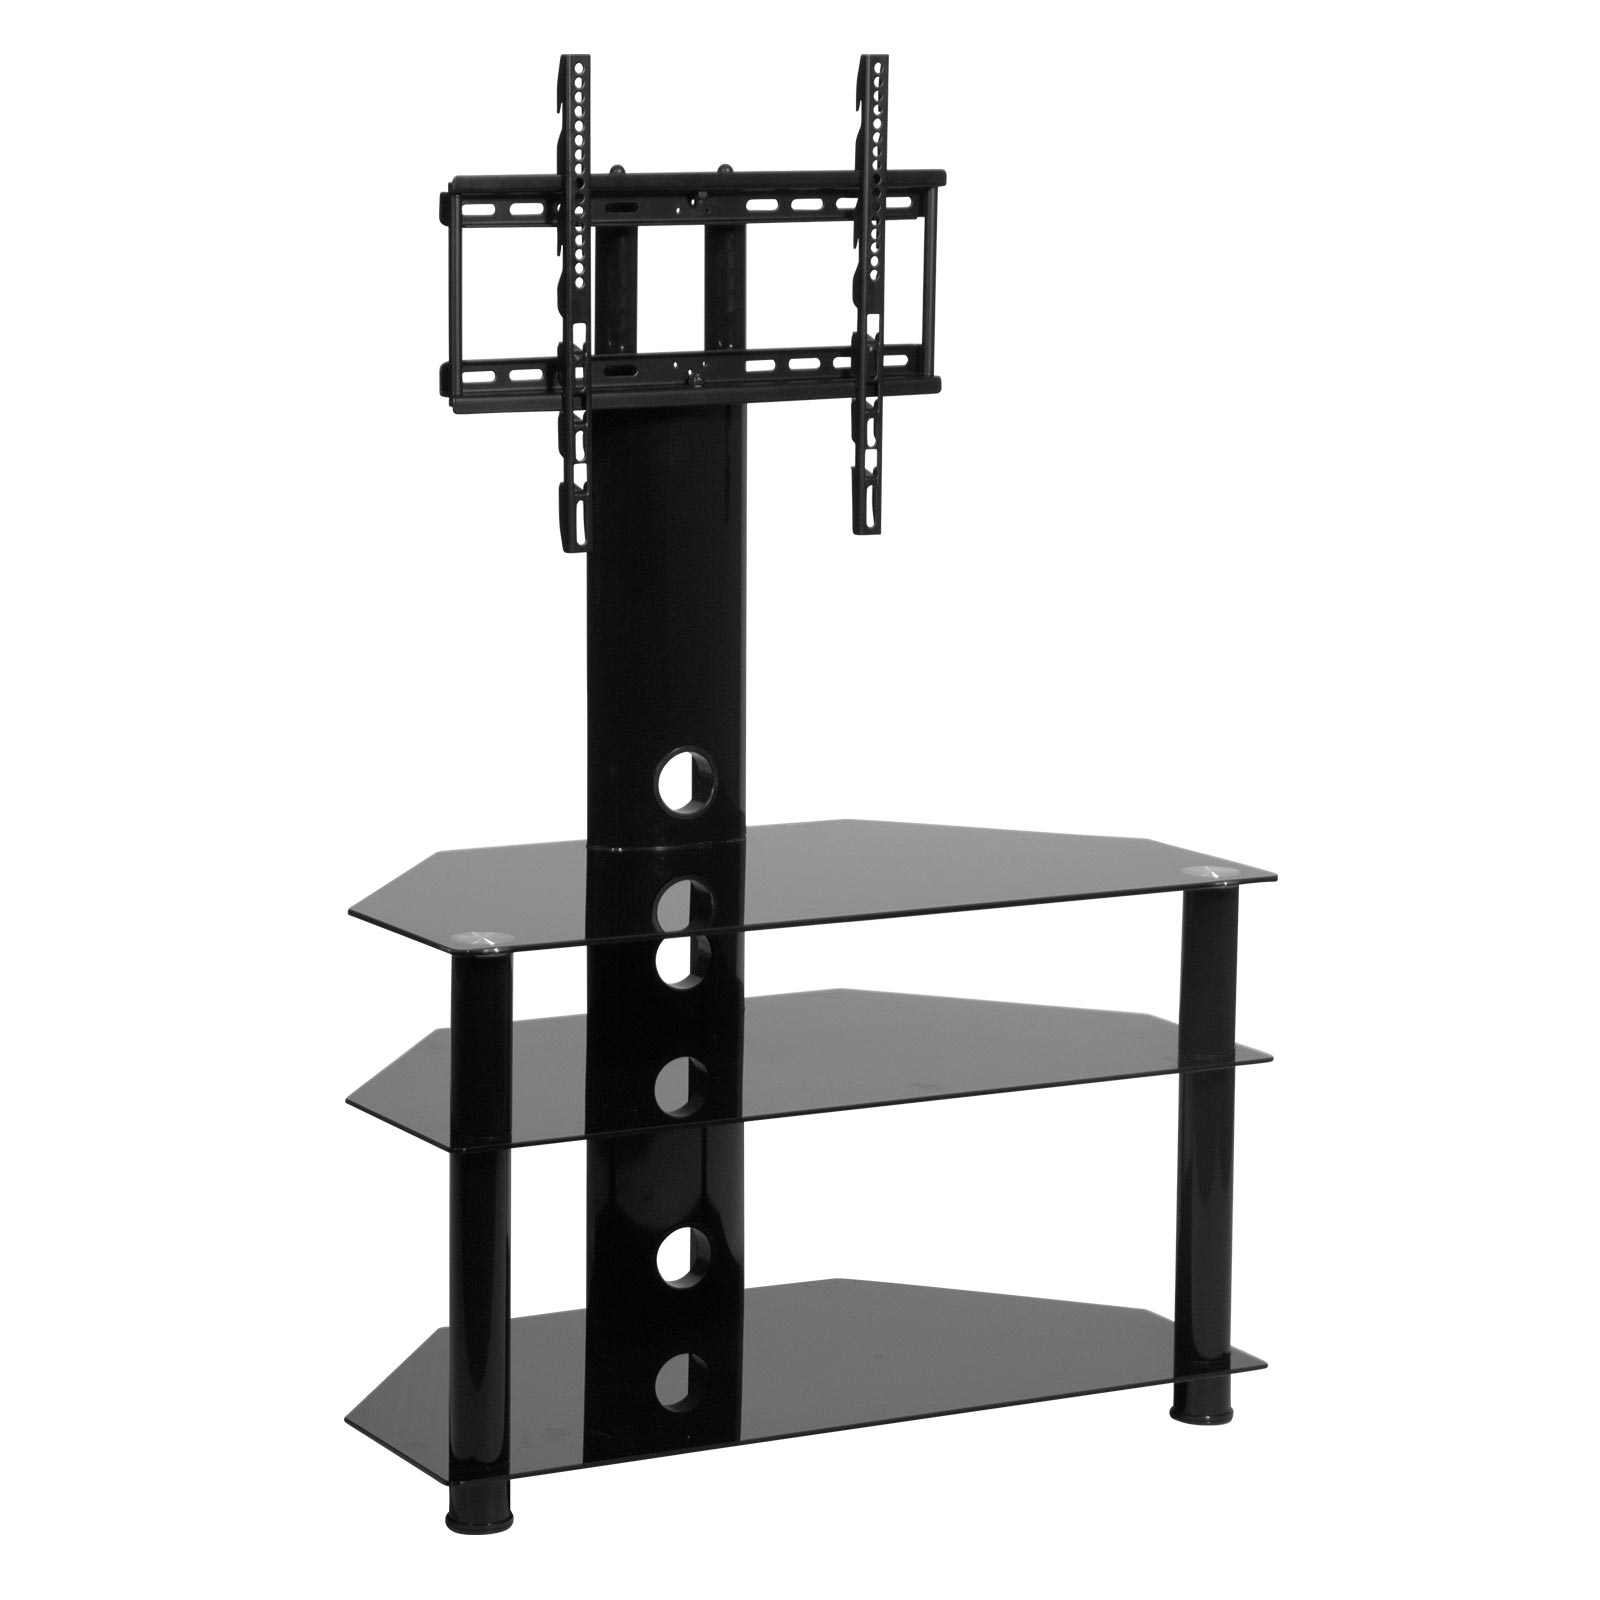 MMT Rio CB32 Cantilever TV Stand for 32"-50" Screens ...